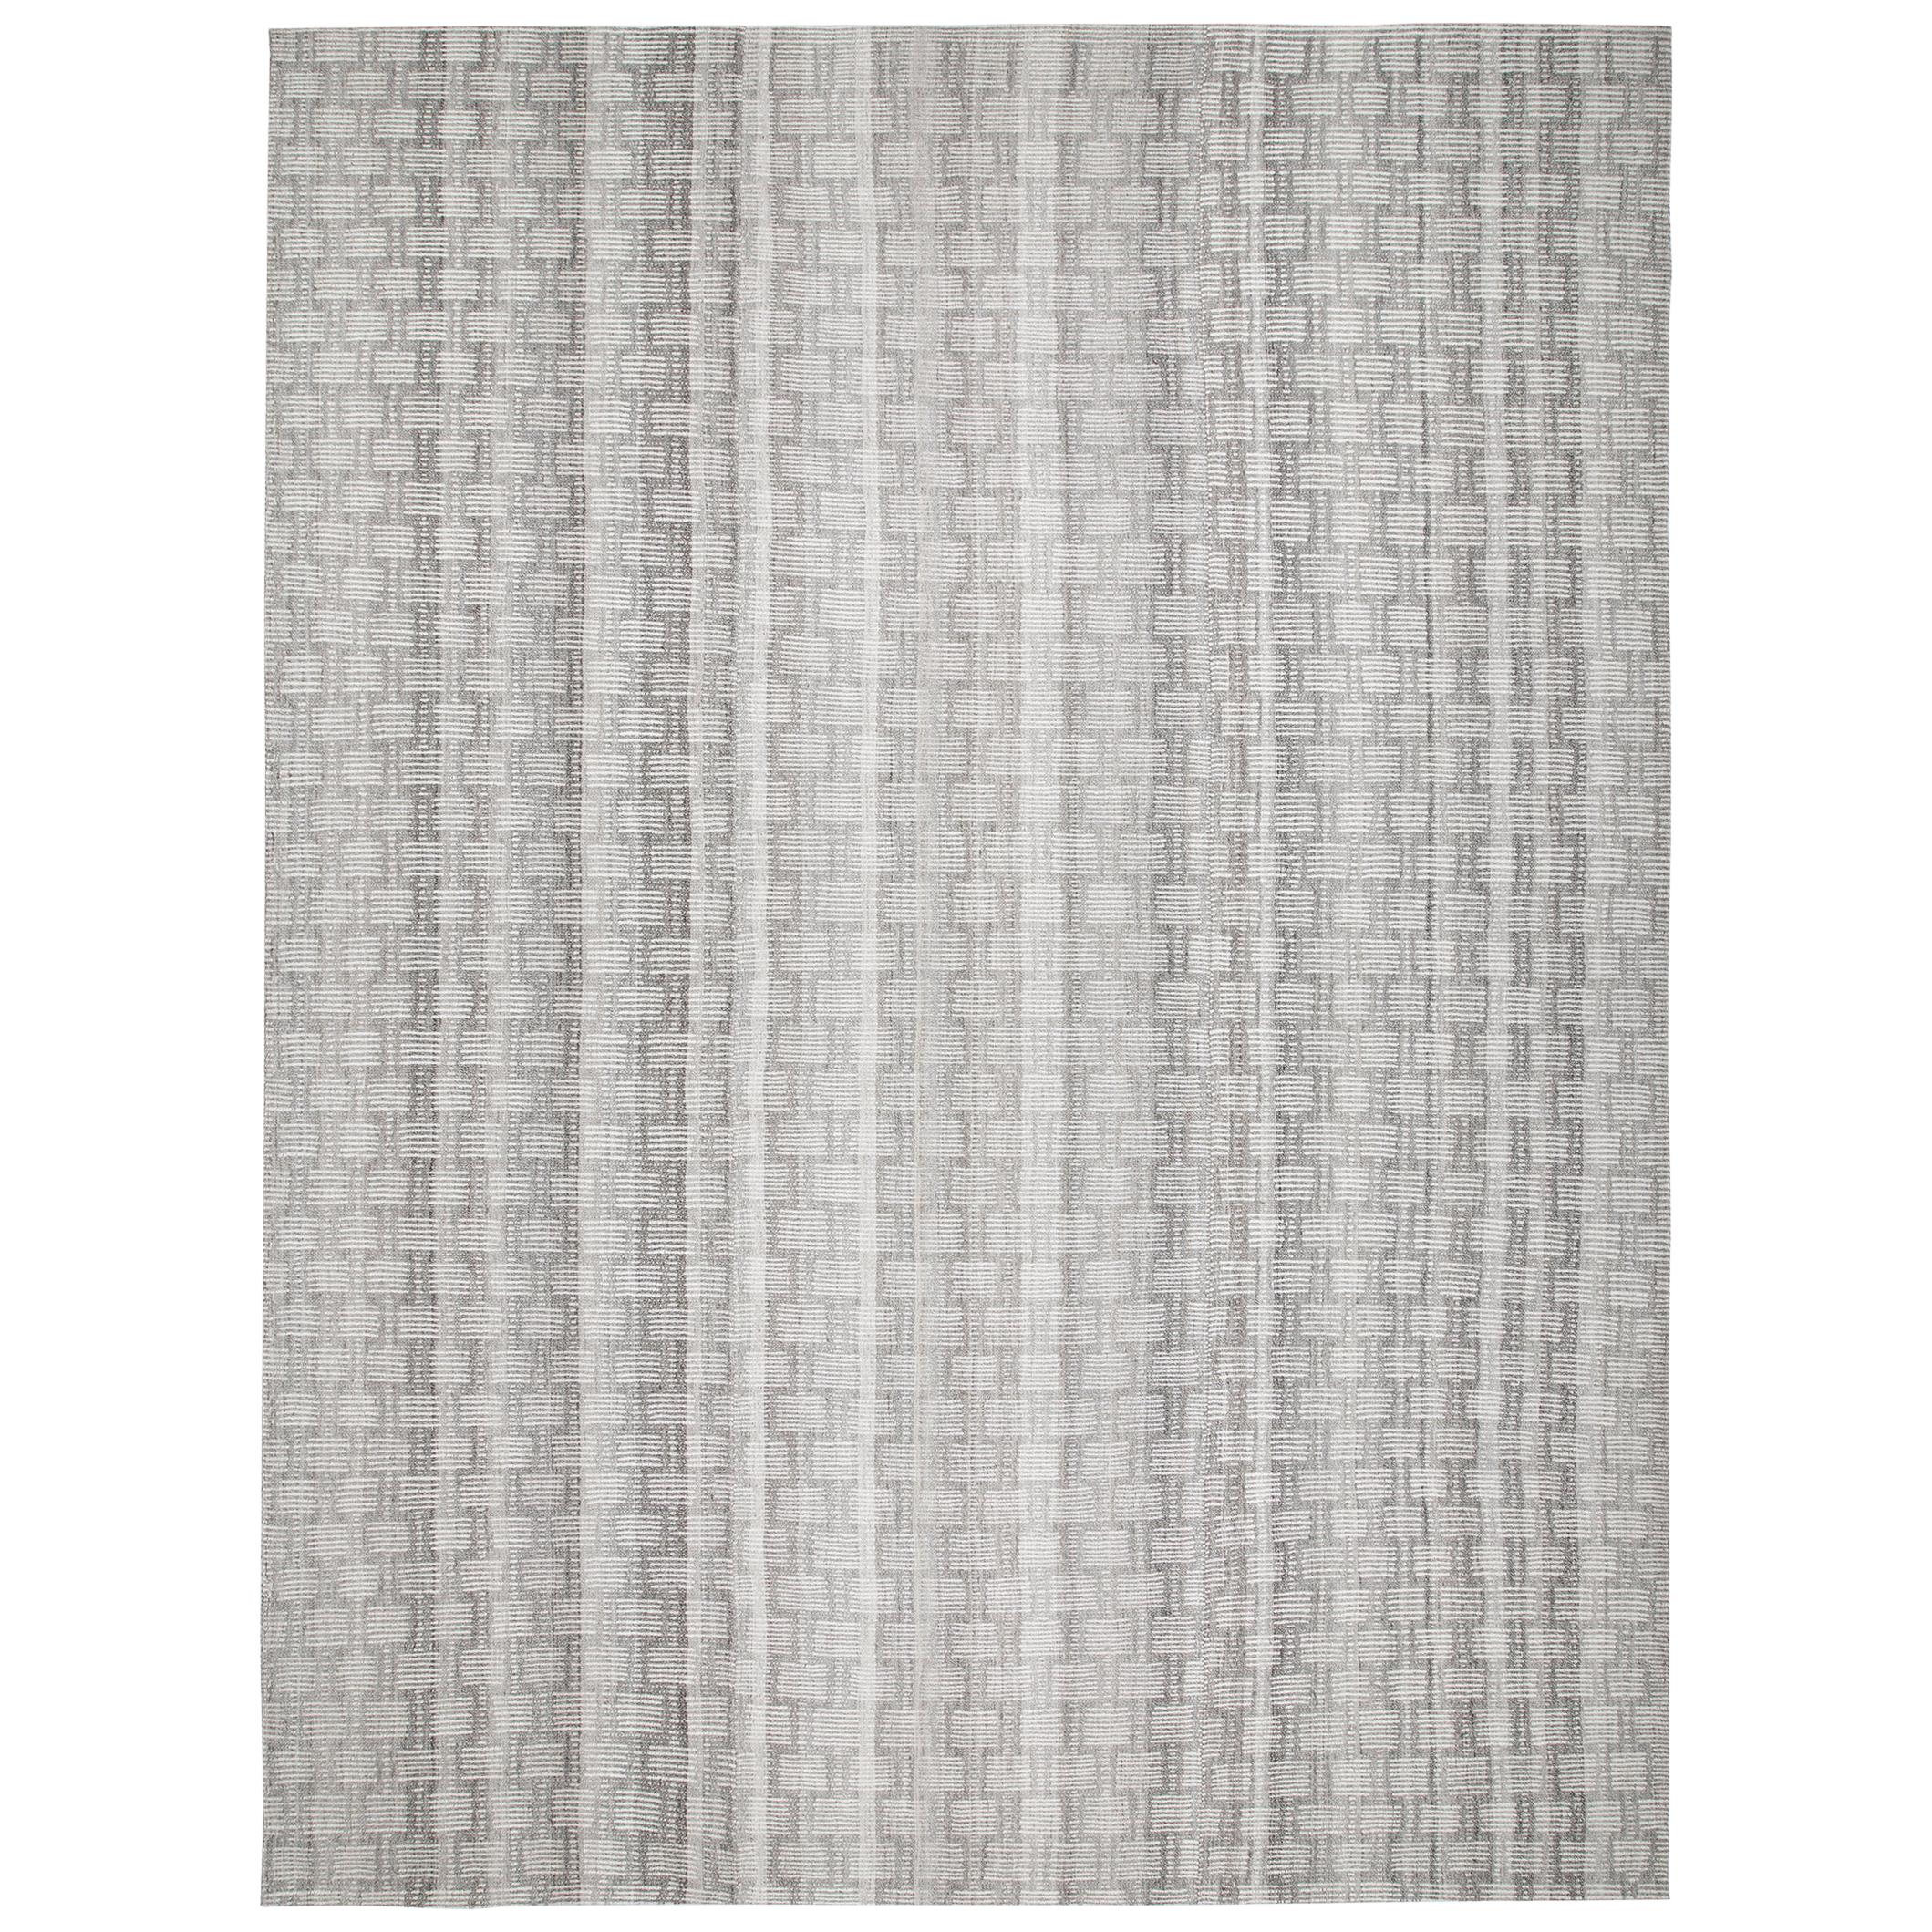 Modern Decorative Flatweave Textured Rug in Natural Tones For Sale